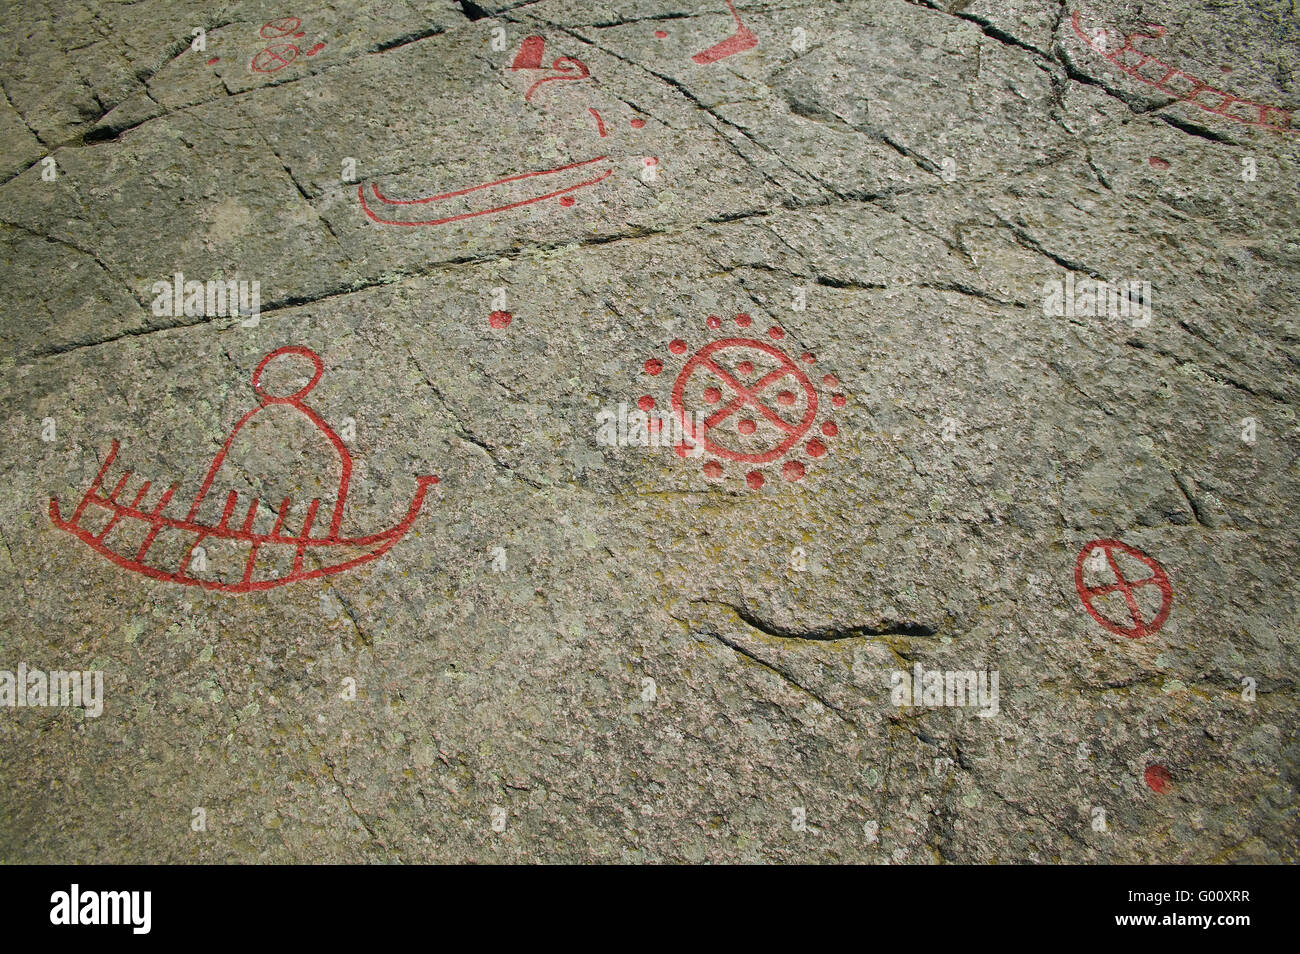 historical rock drawings Stock Photo